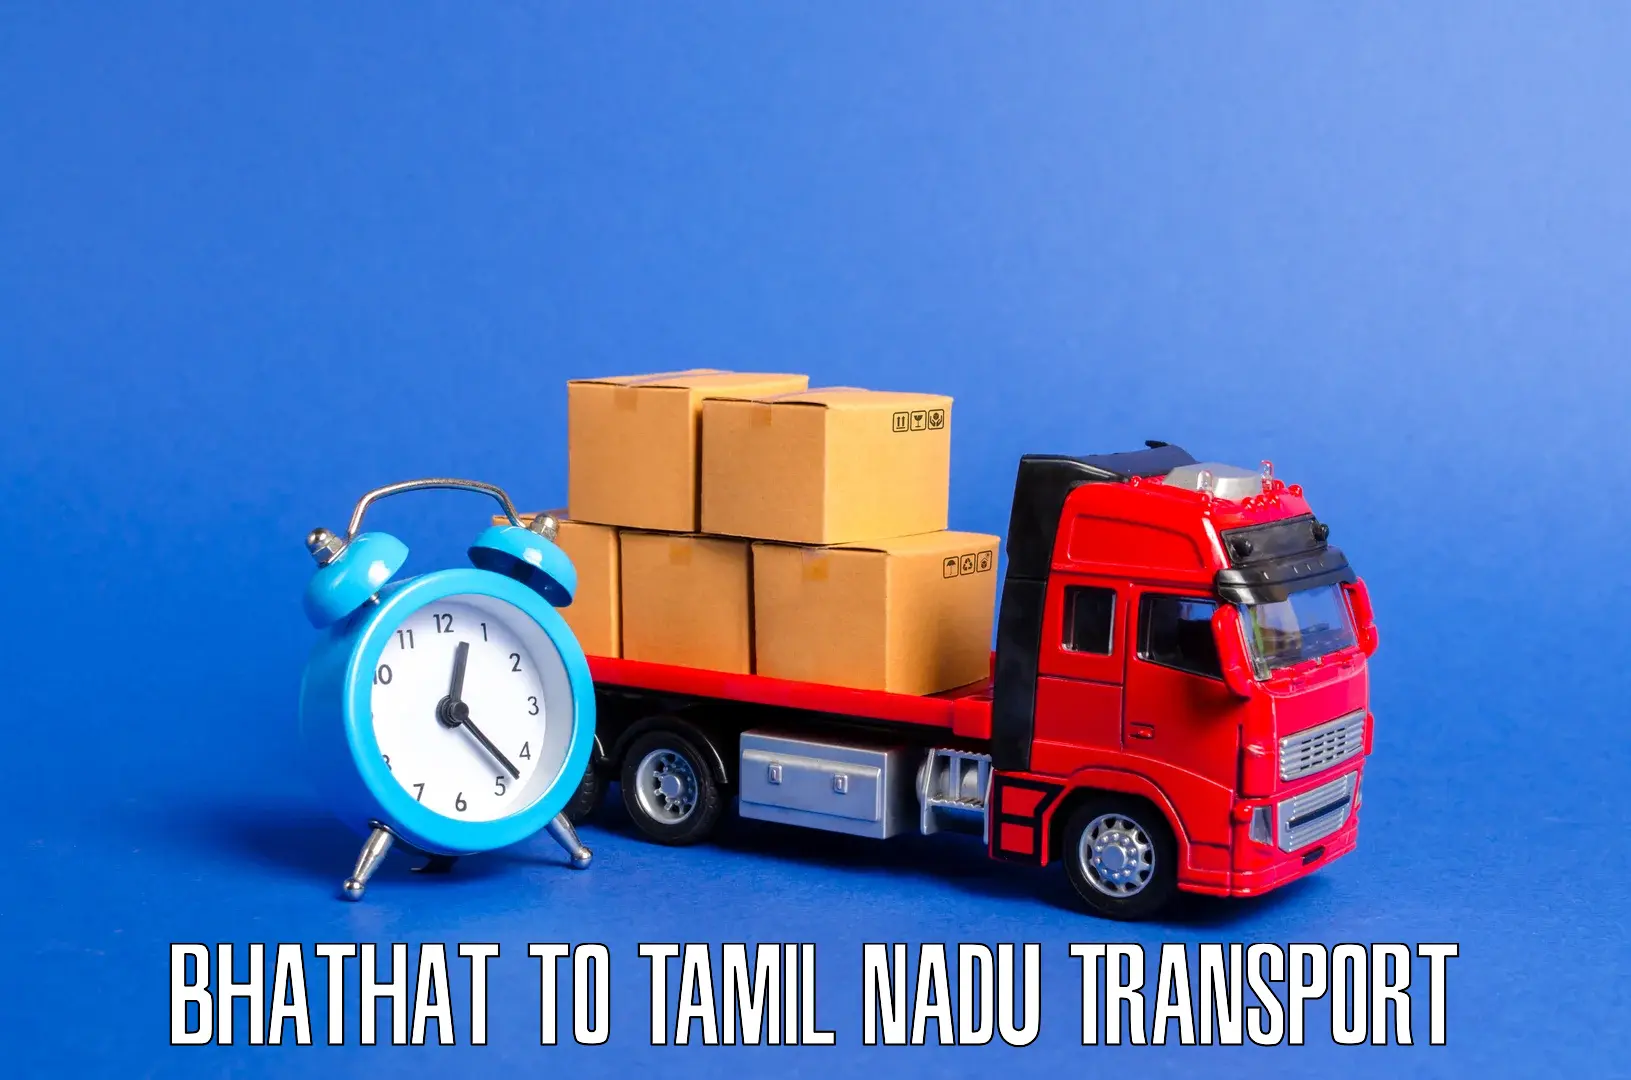 Daily parcel service transport Bhathat to Mylapore